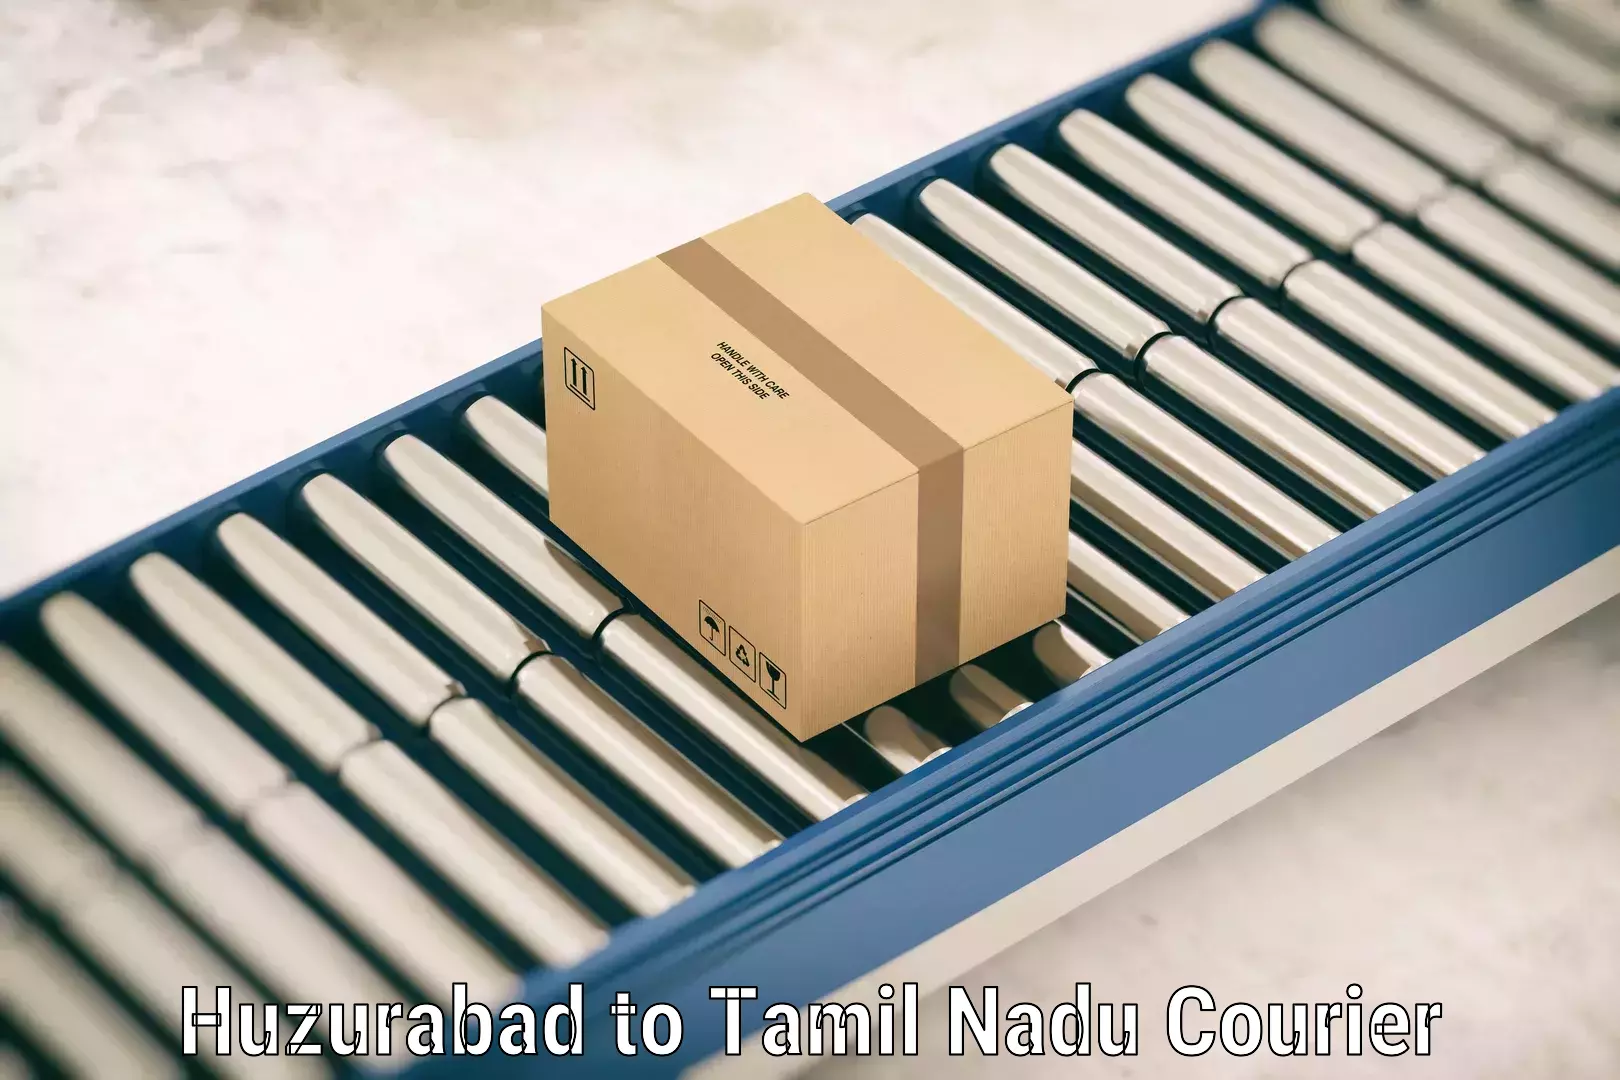 Baggage delivery technology Huzurabad to Chennai